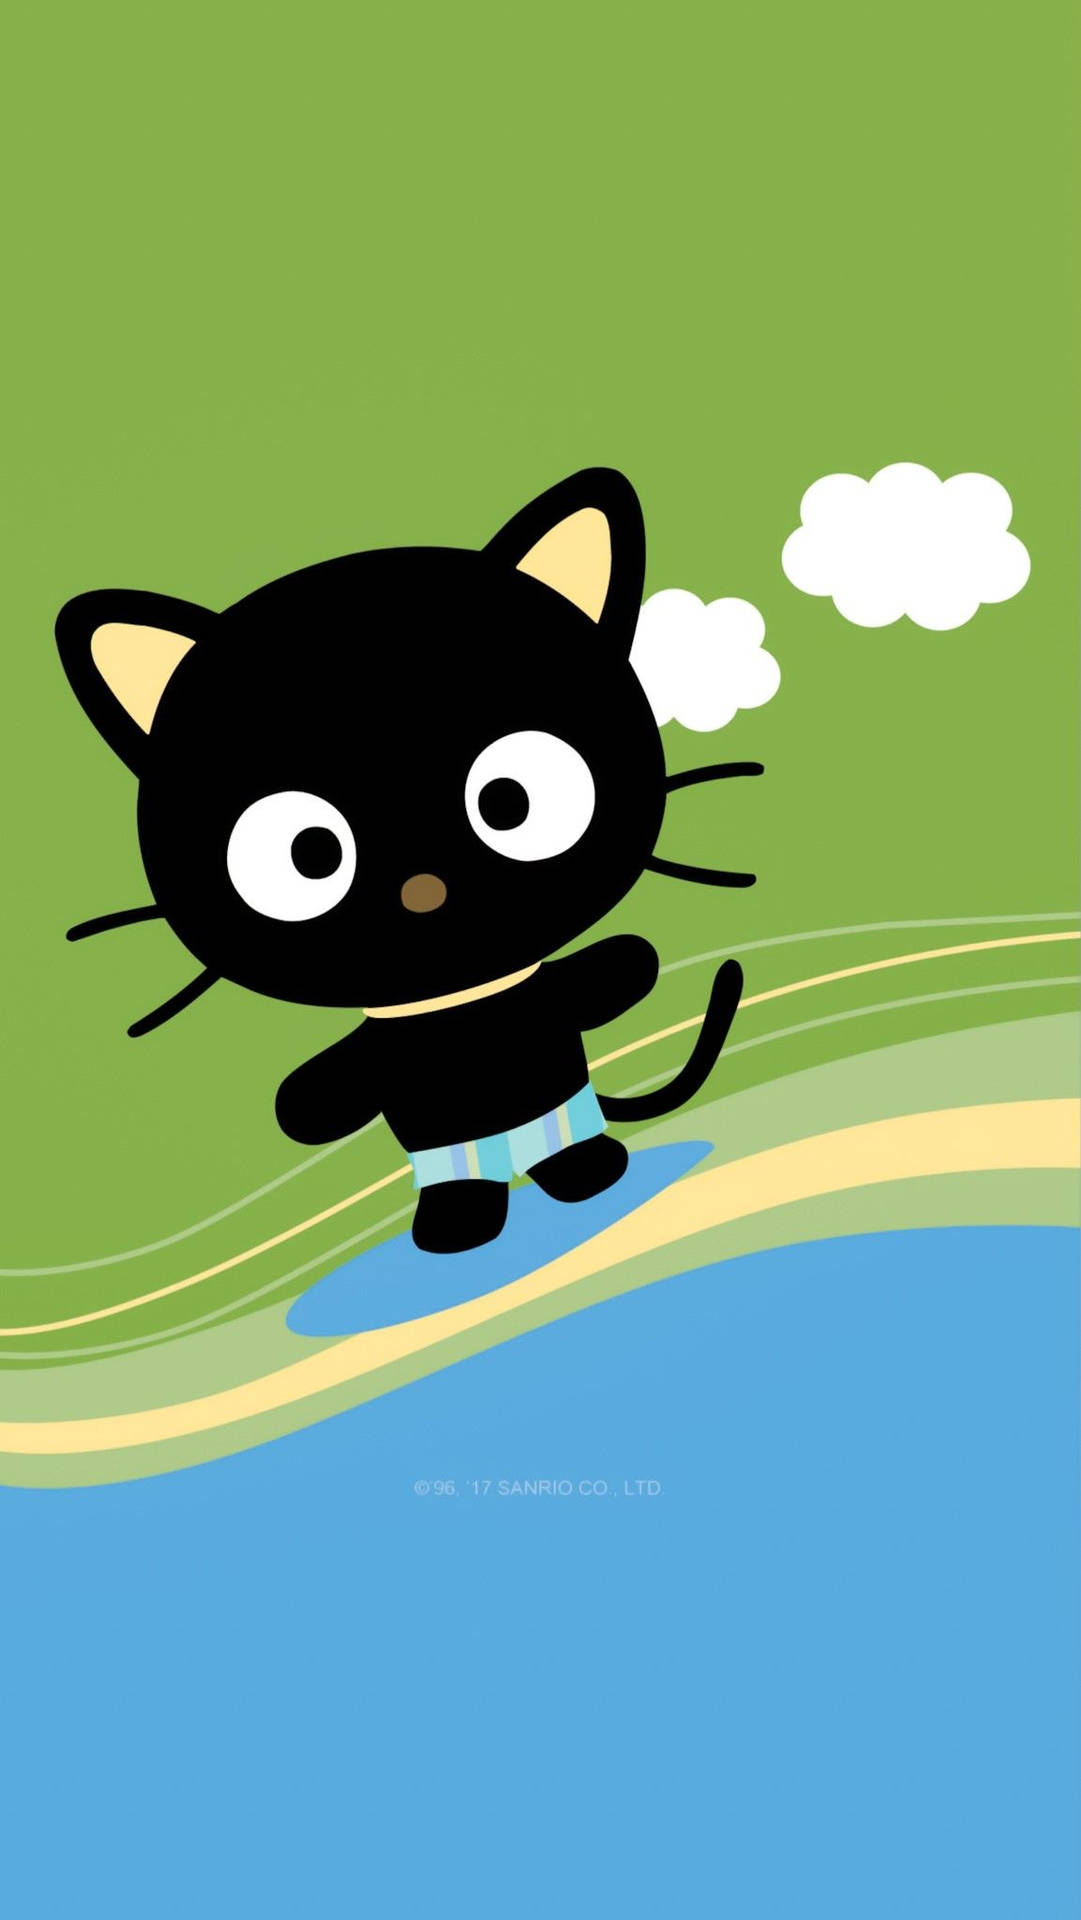 Free Chococat Wallpaper Downloads, [100+] Chococat Wallpapers for FREE |  